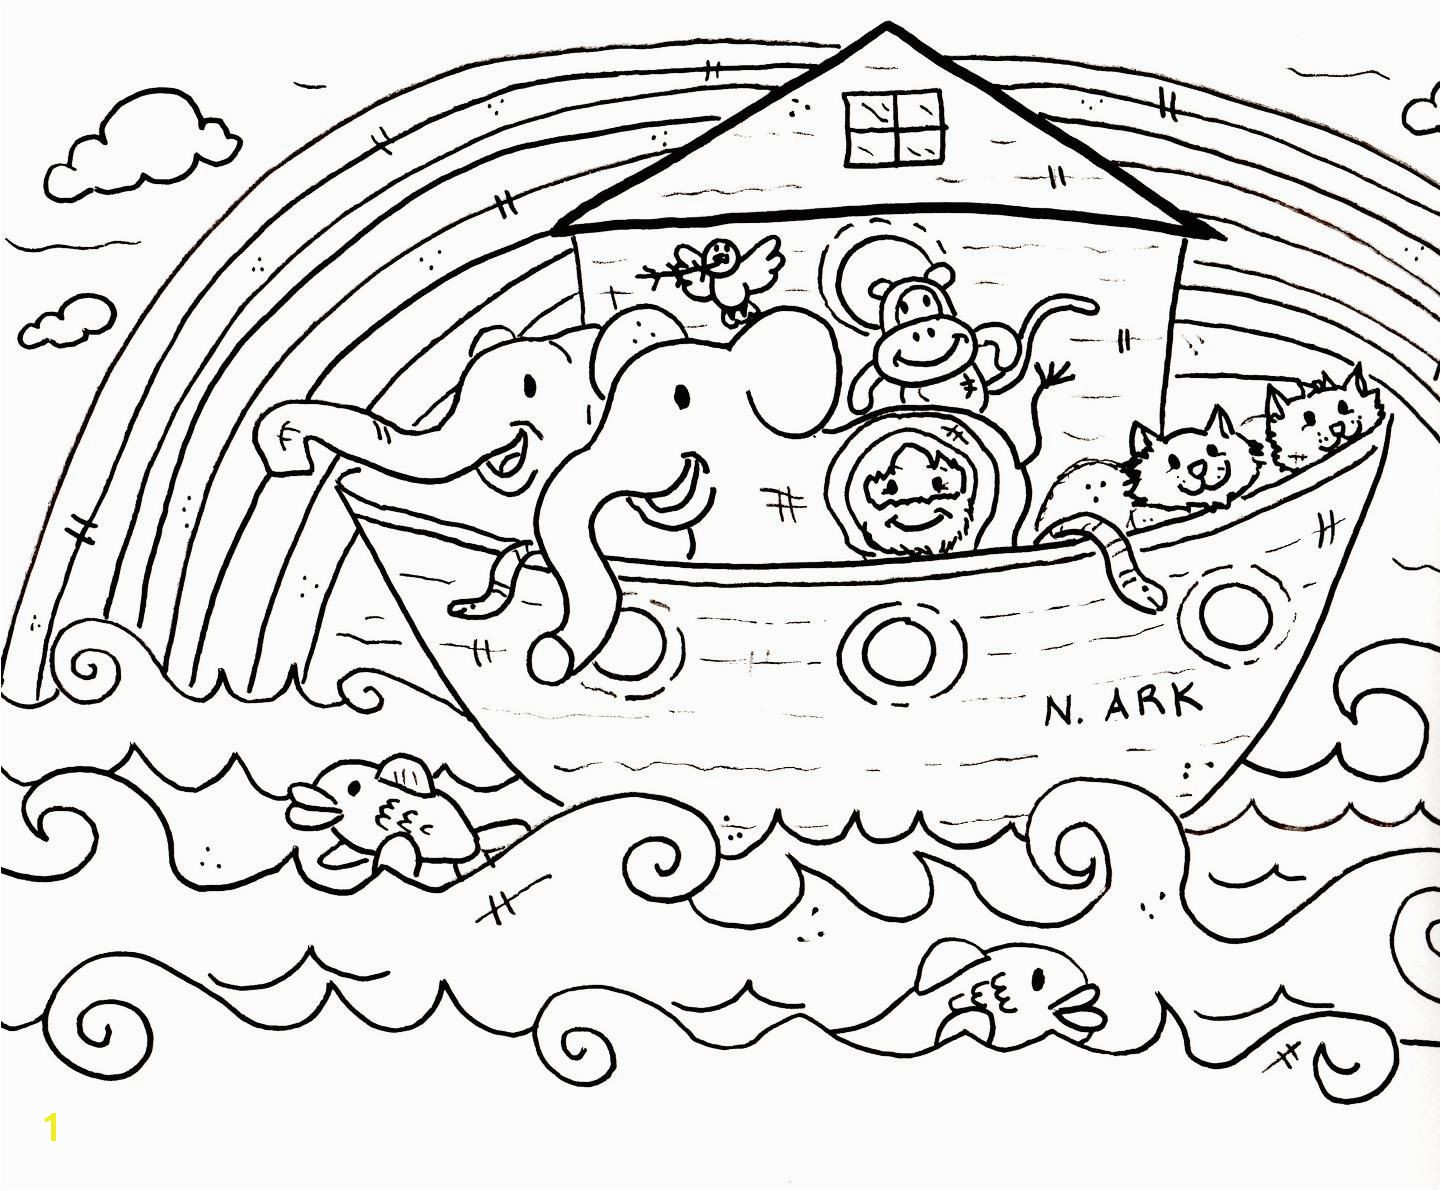 Early Church Coloring Page Children Coloring Pages for Church